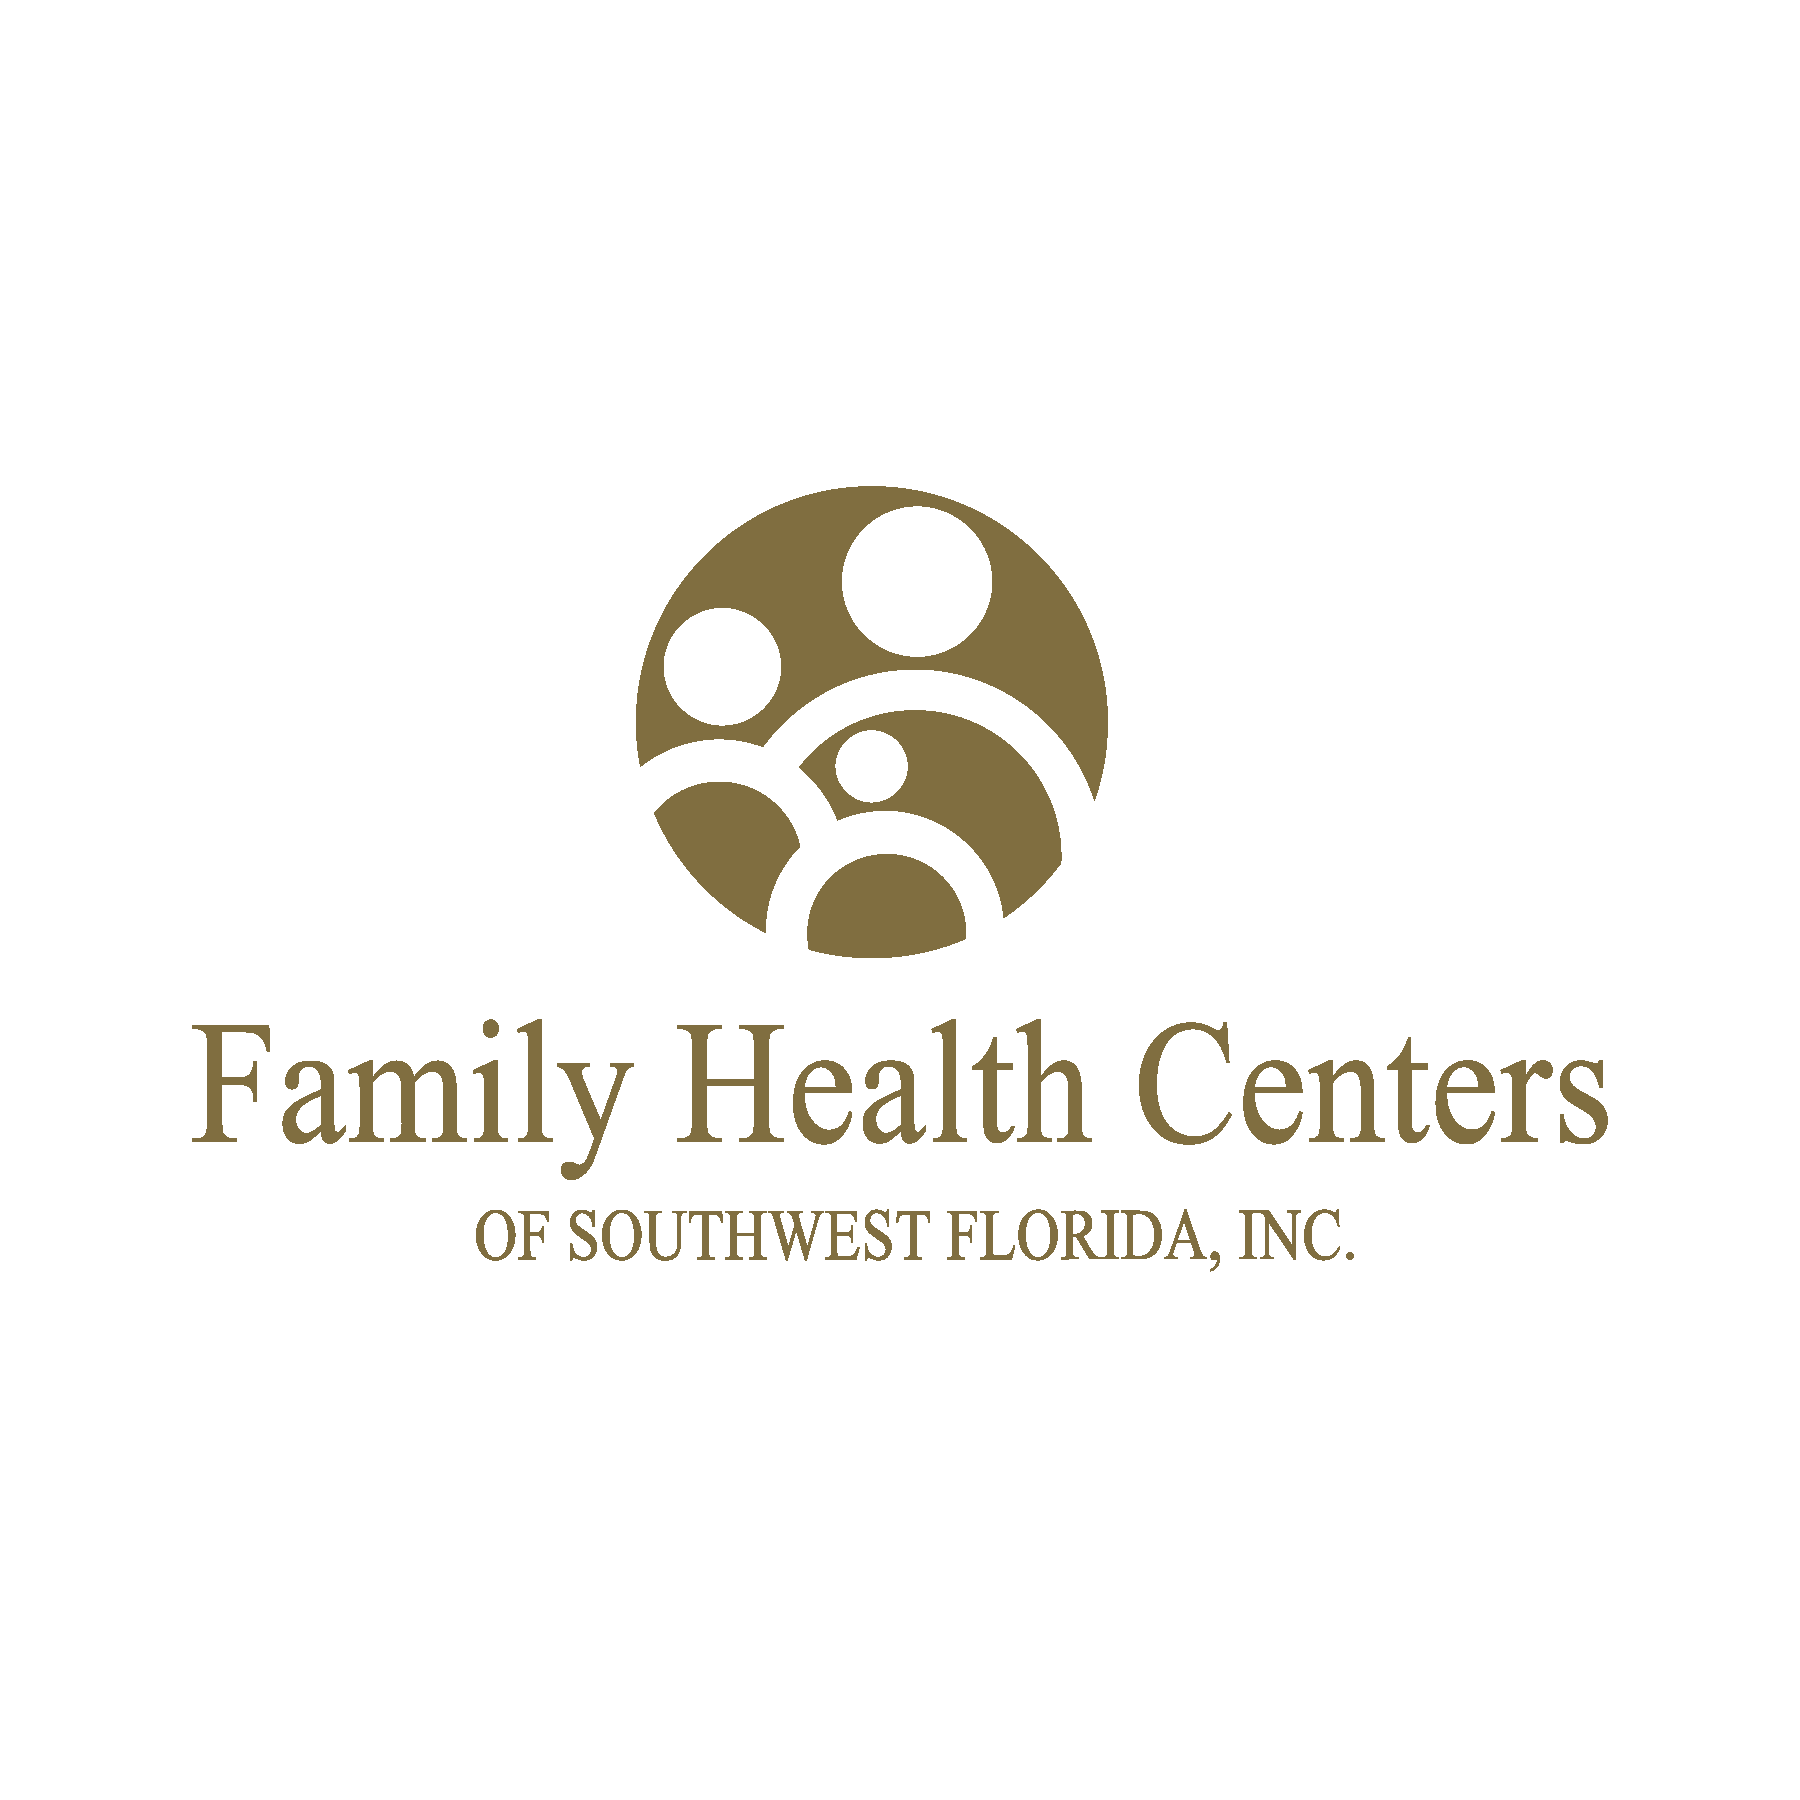 Family Health Centers of SouthWest Florida